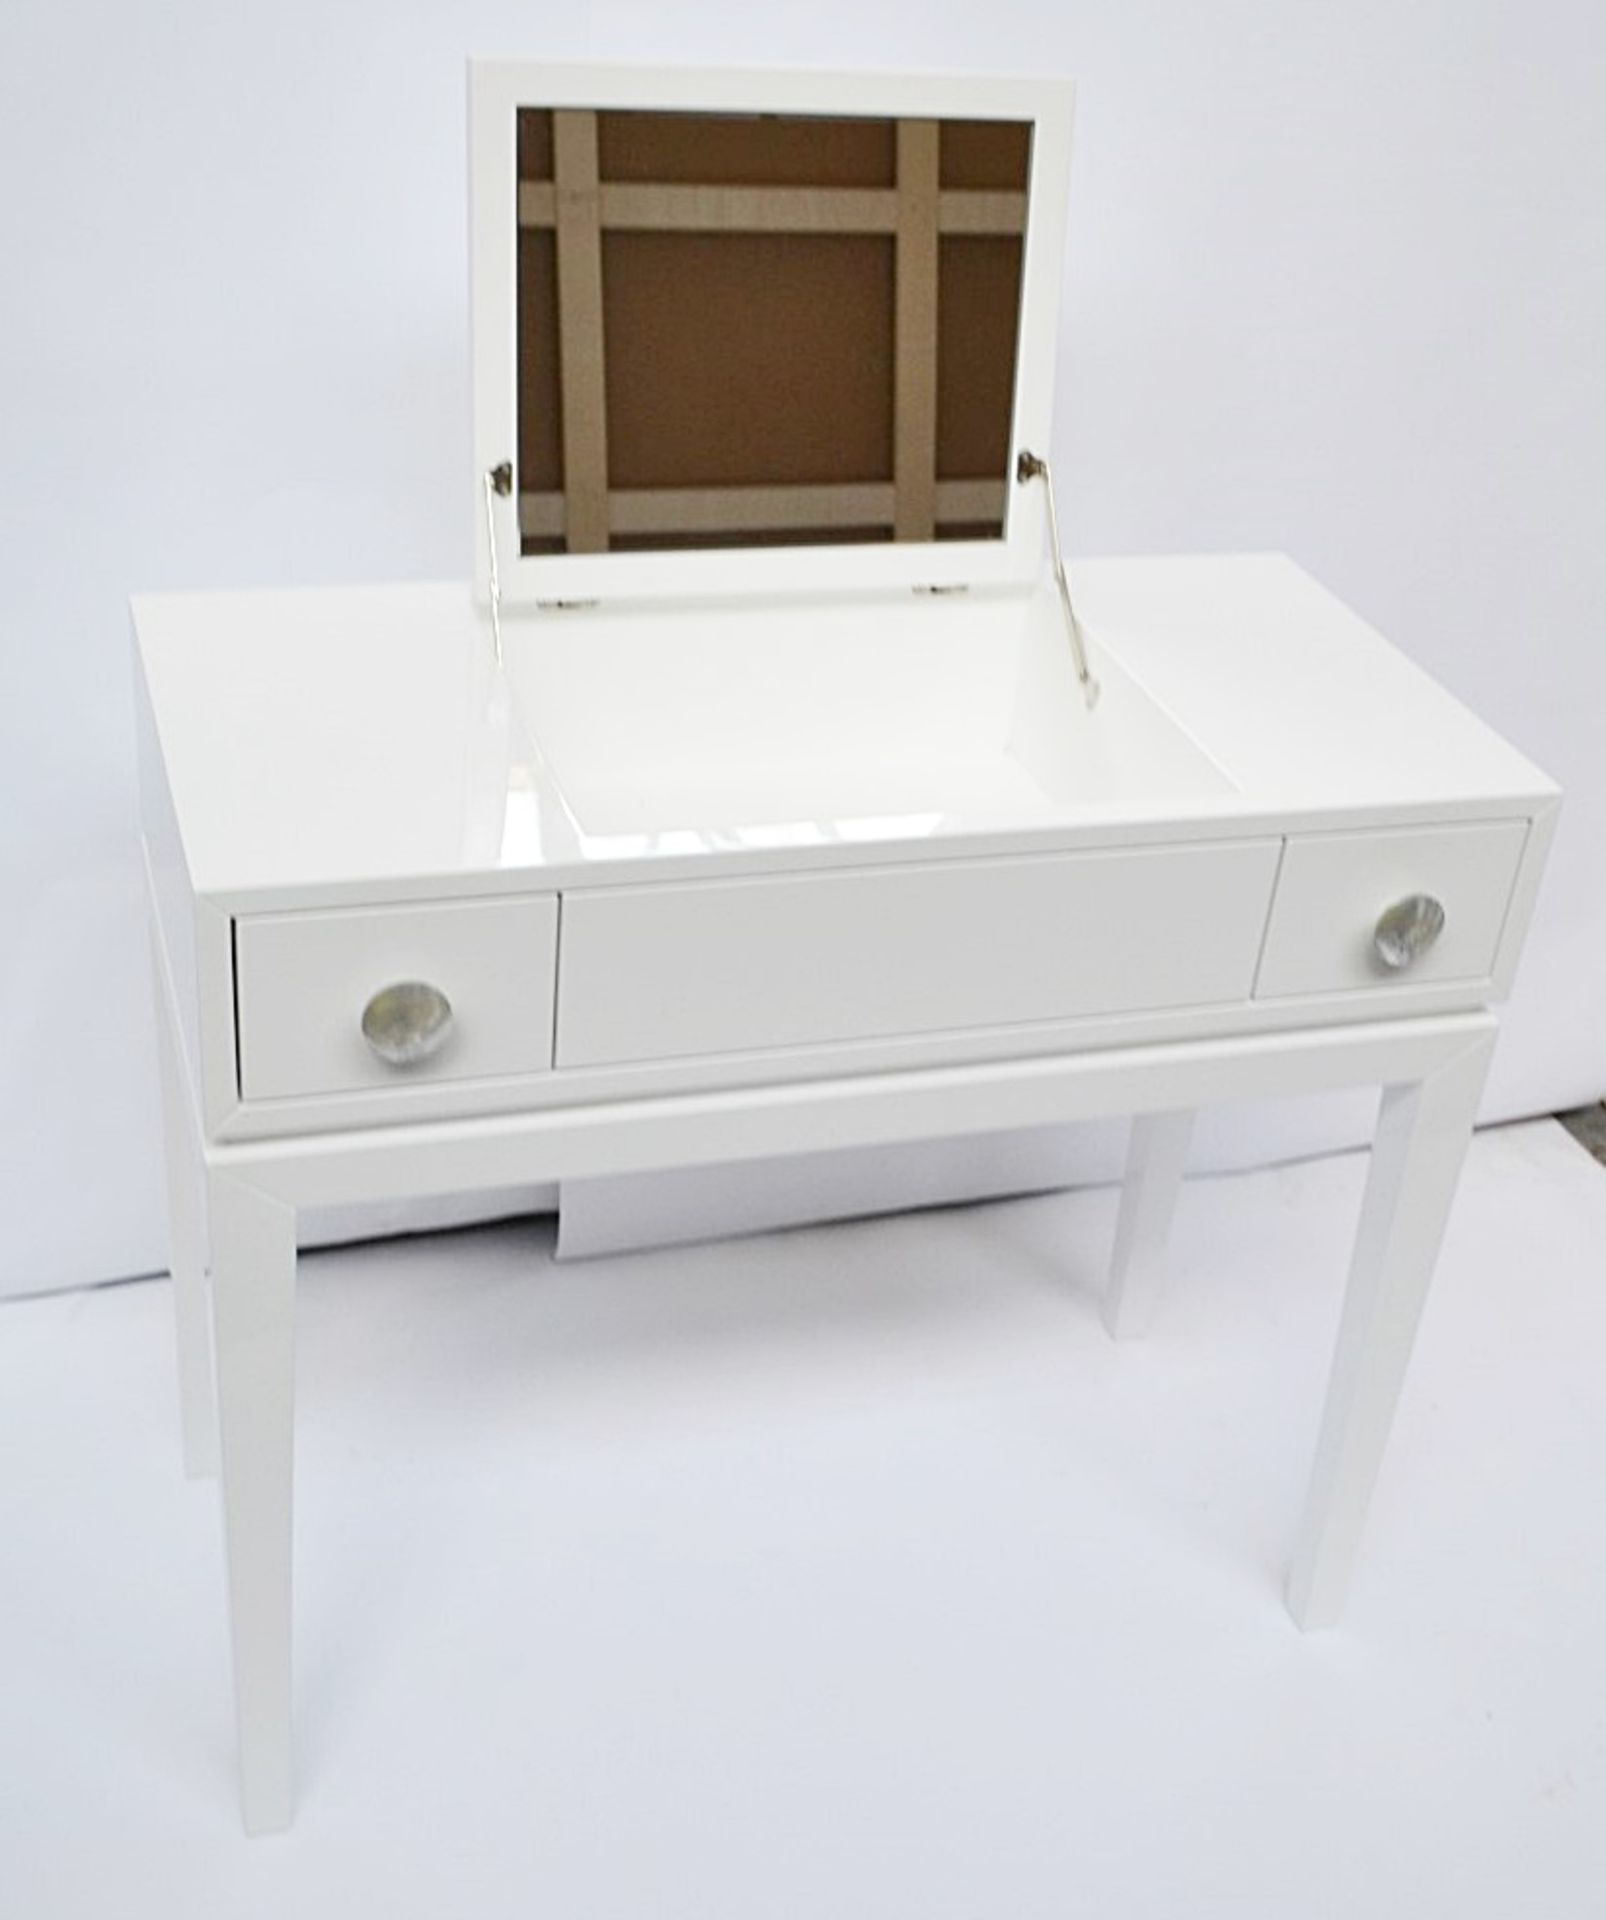 1 x FRATO Chicago Dressing Console - White Lacquered - Dimensions: H75 x W85 x D40cm - Ref: - Image 3 of 6